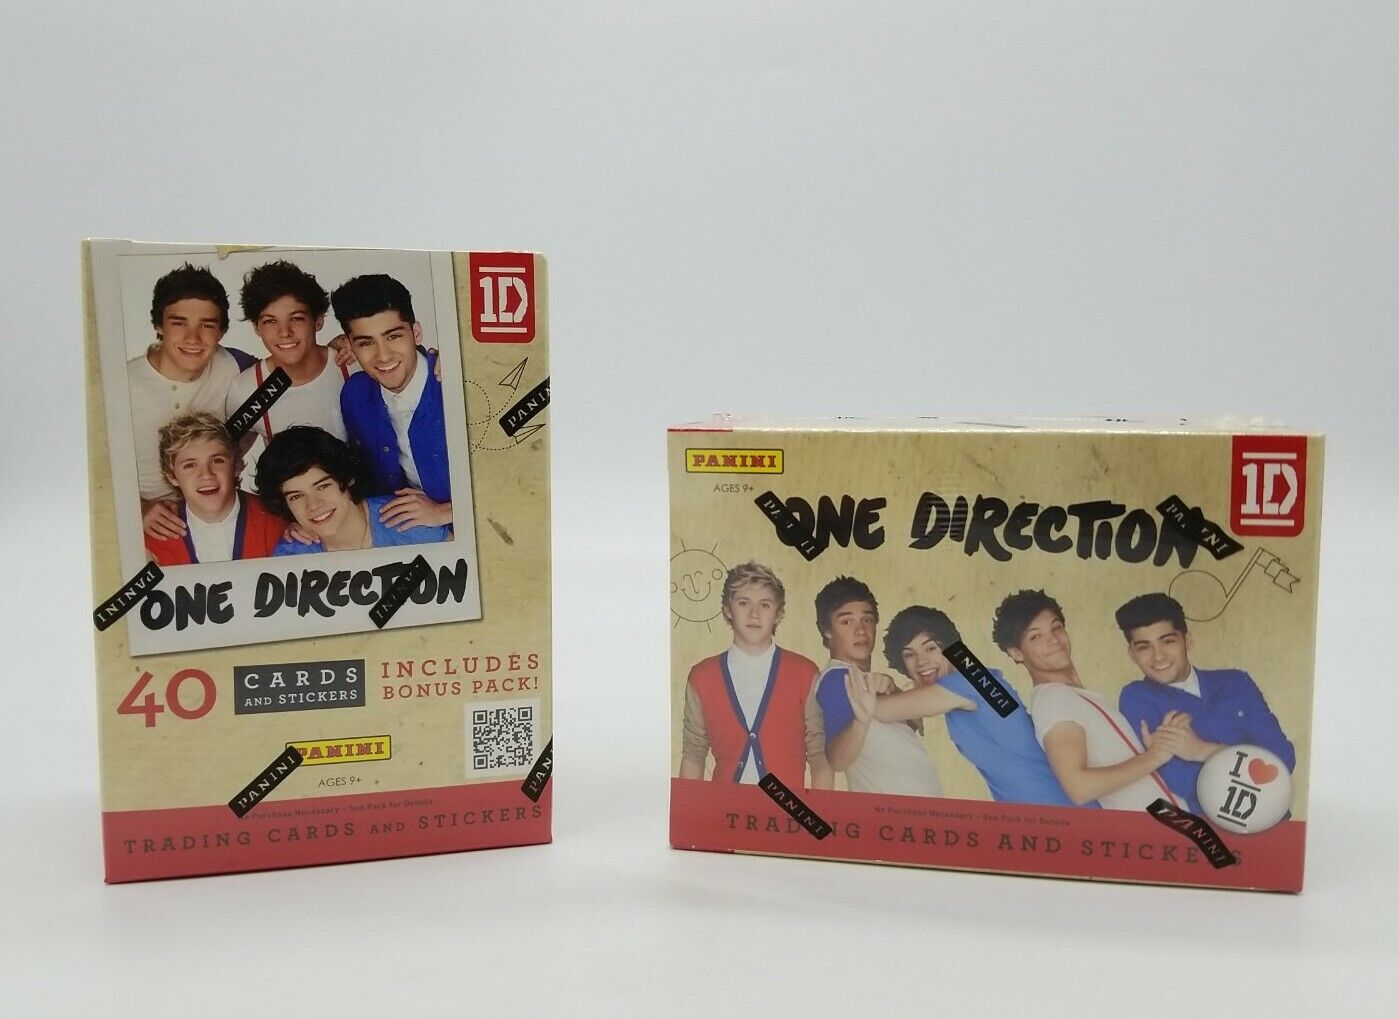 2013 Panini One Direction Trading Cards & Stickers Blaster Box Lot of 2 Sealed